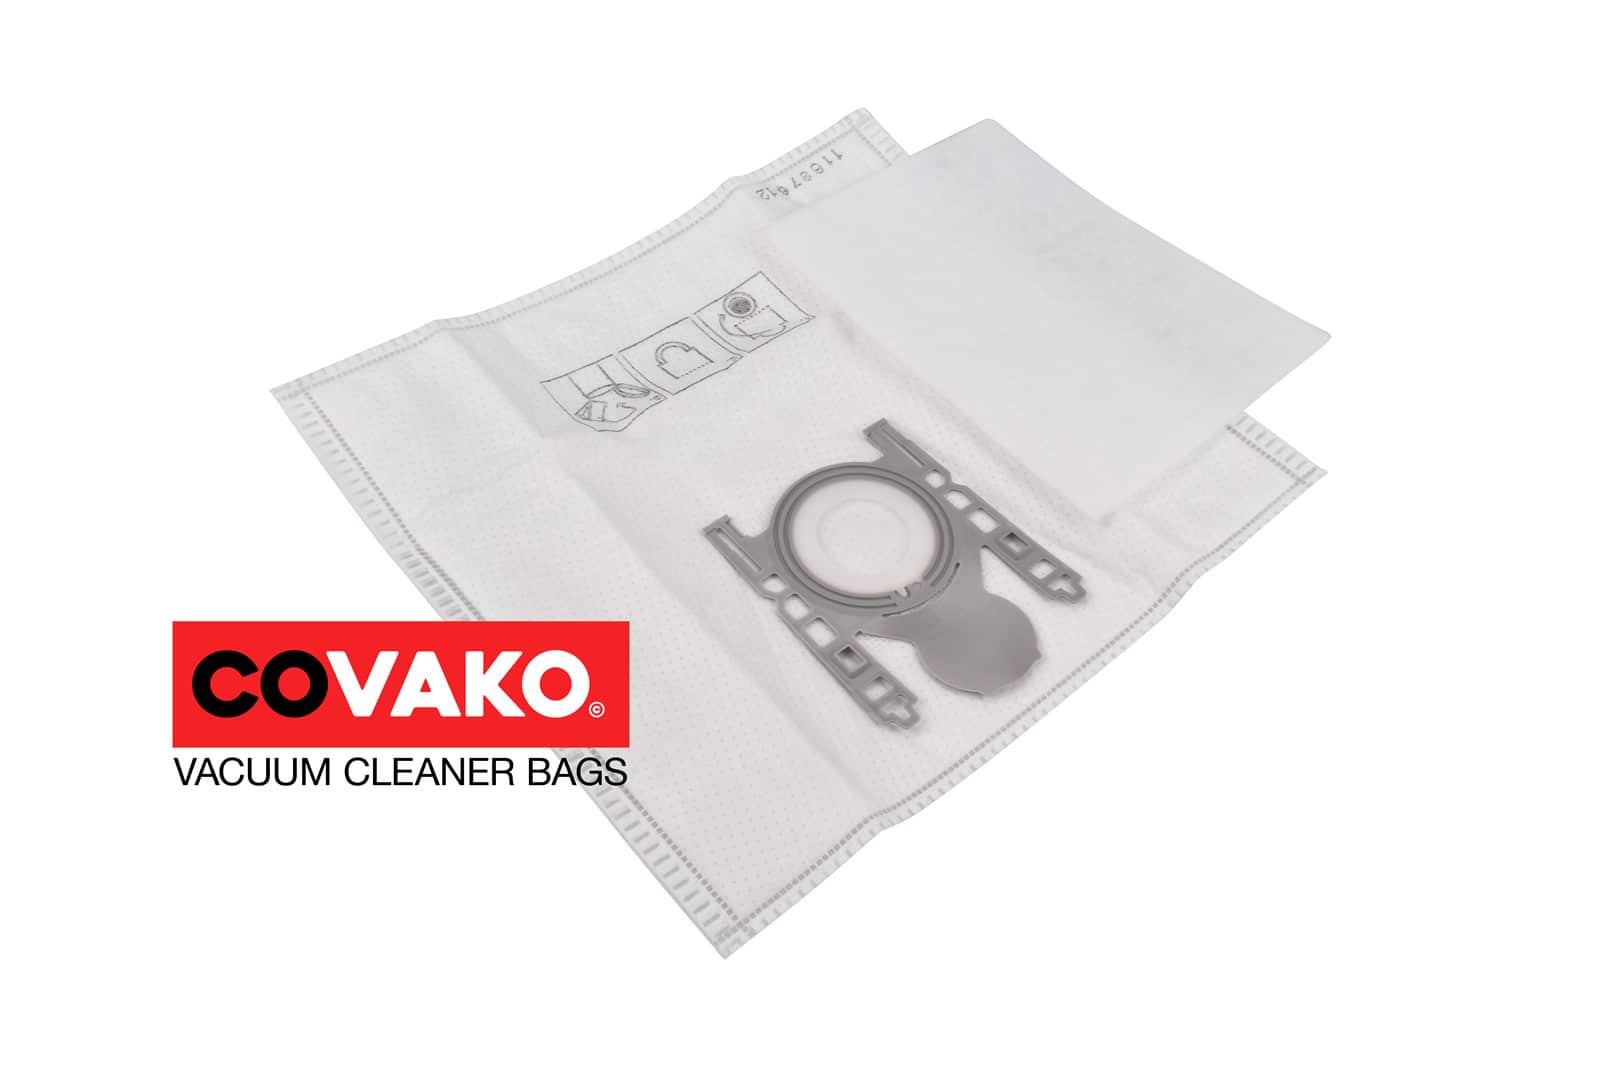 Bosch BSD 0000-9999 / Synthesis - Bosch vacuum cleaner bags